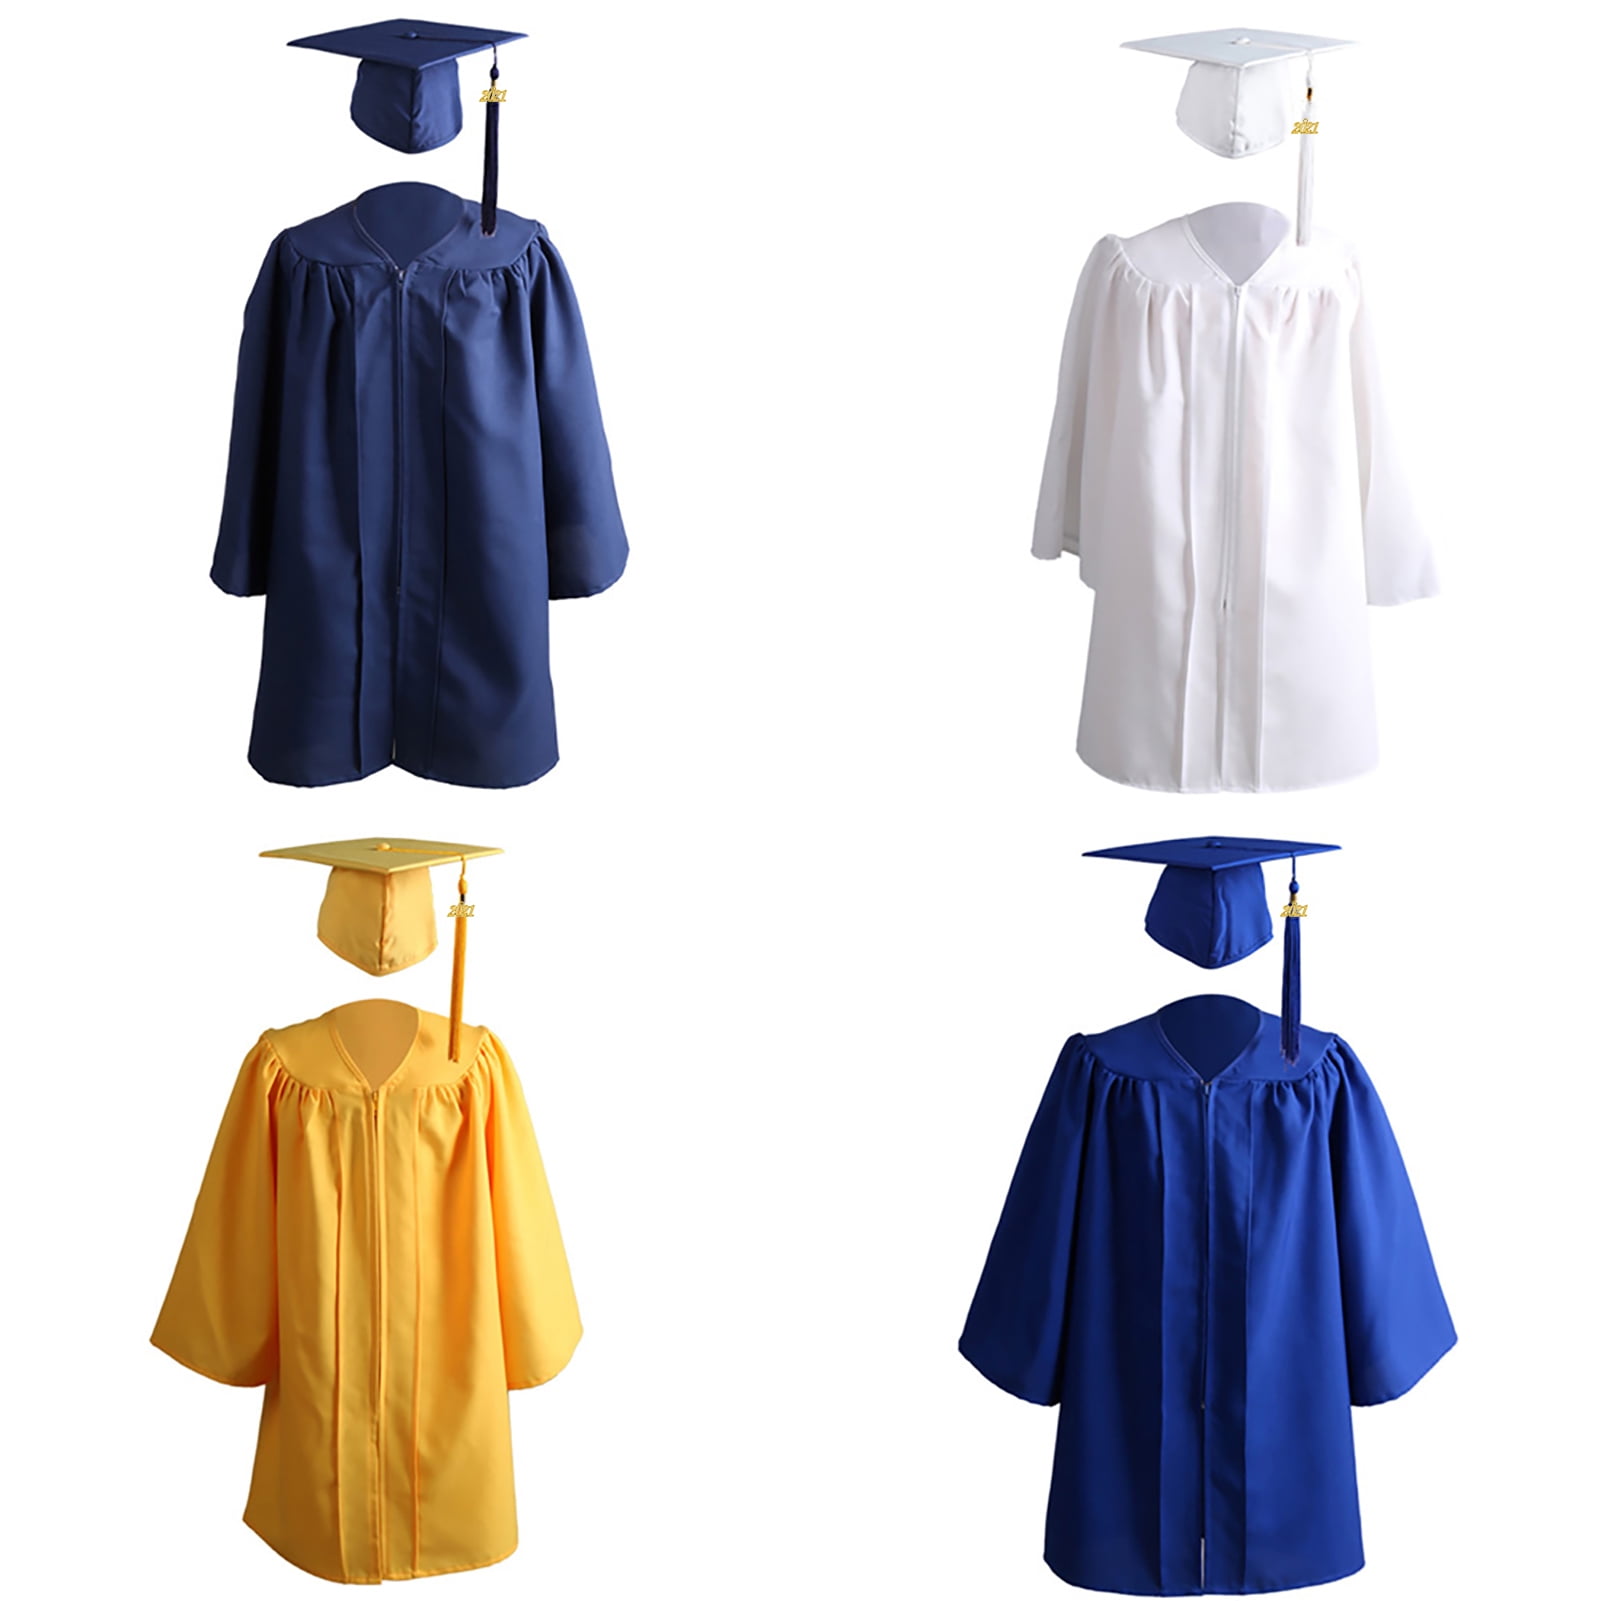 Convocation Gown Supplier in Palanganatham,Madurai - Best Convocation Gowns  On Rent in Madurai - Justdial